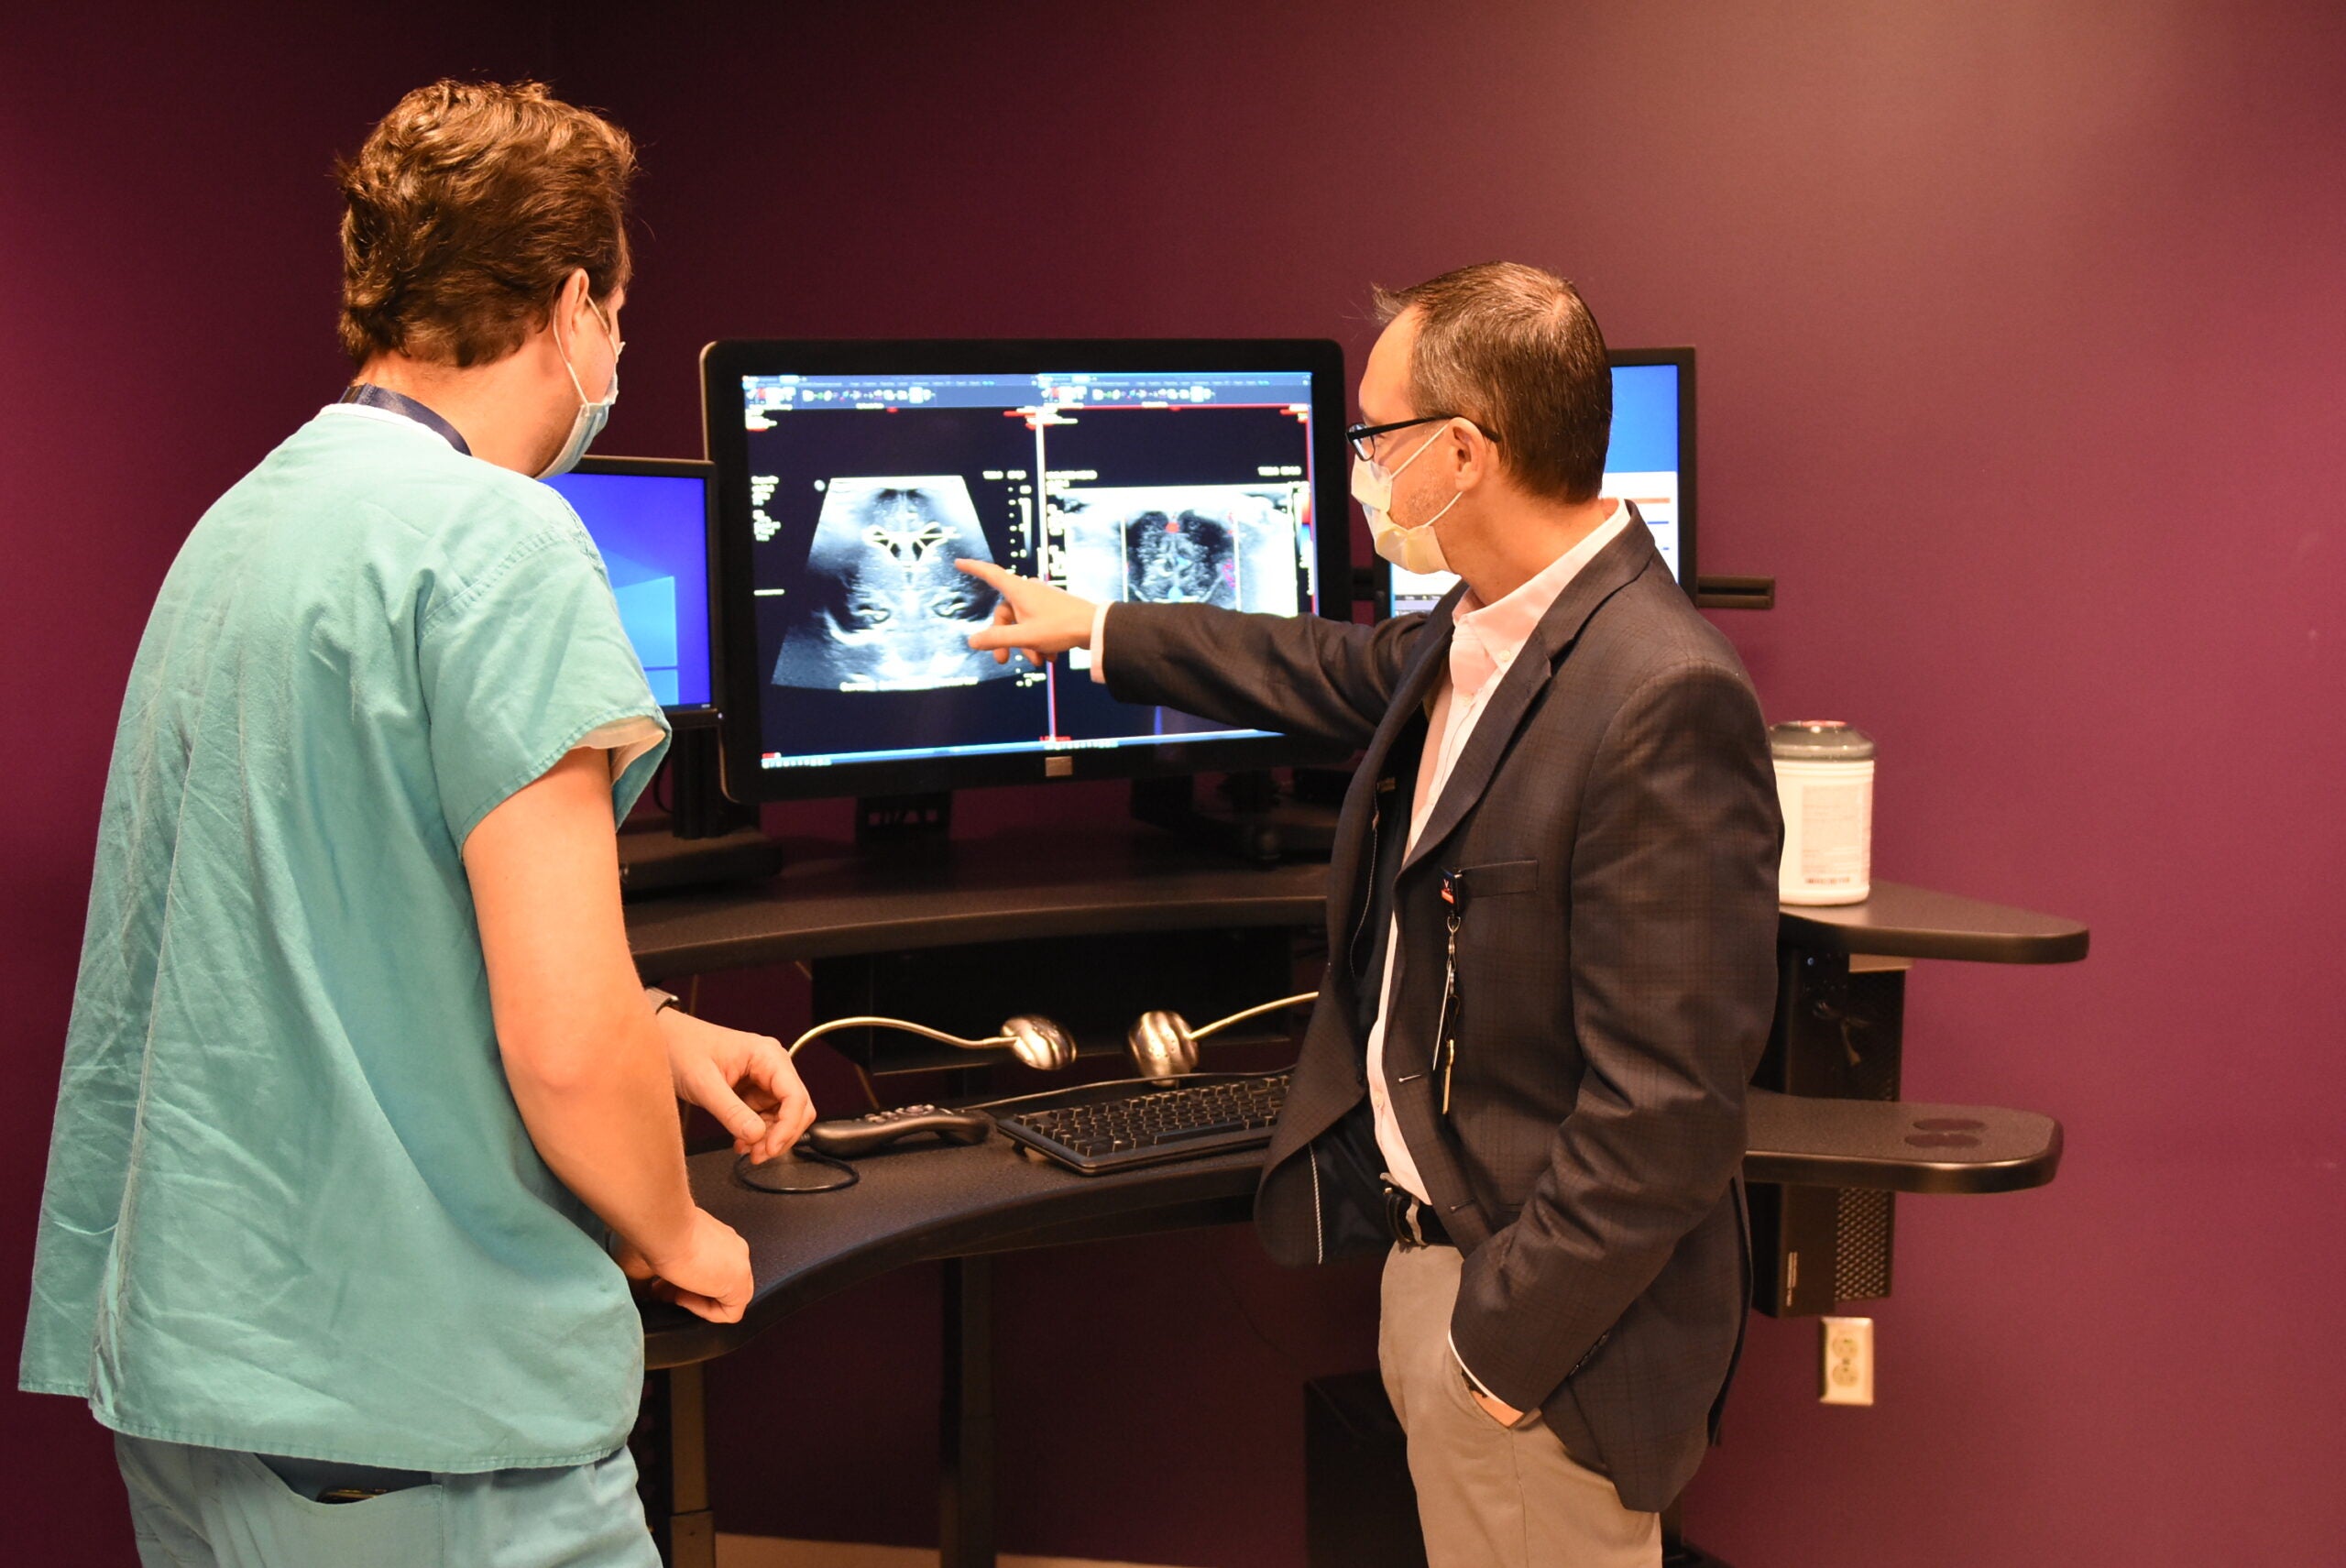 uva radiology faculty analyzes scan with fellow